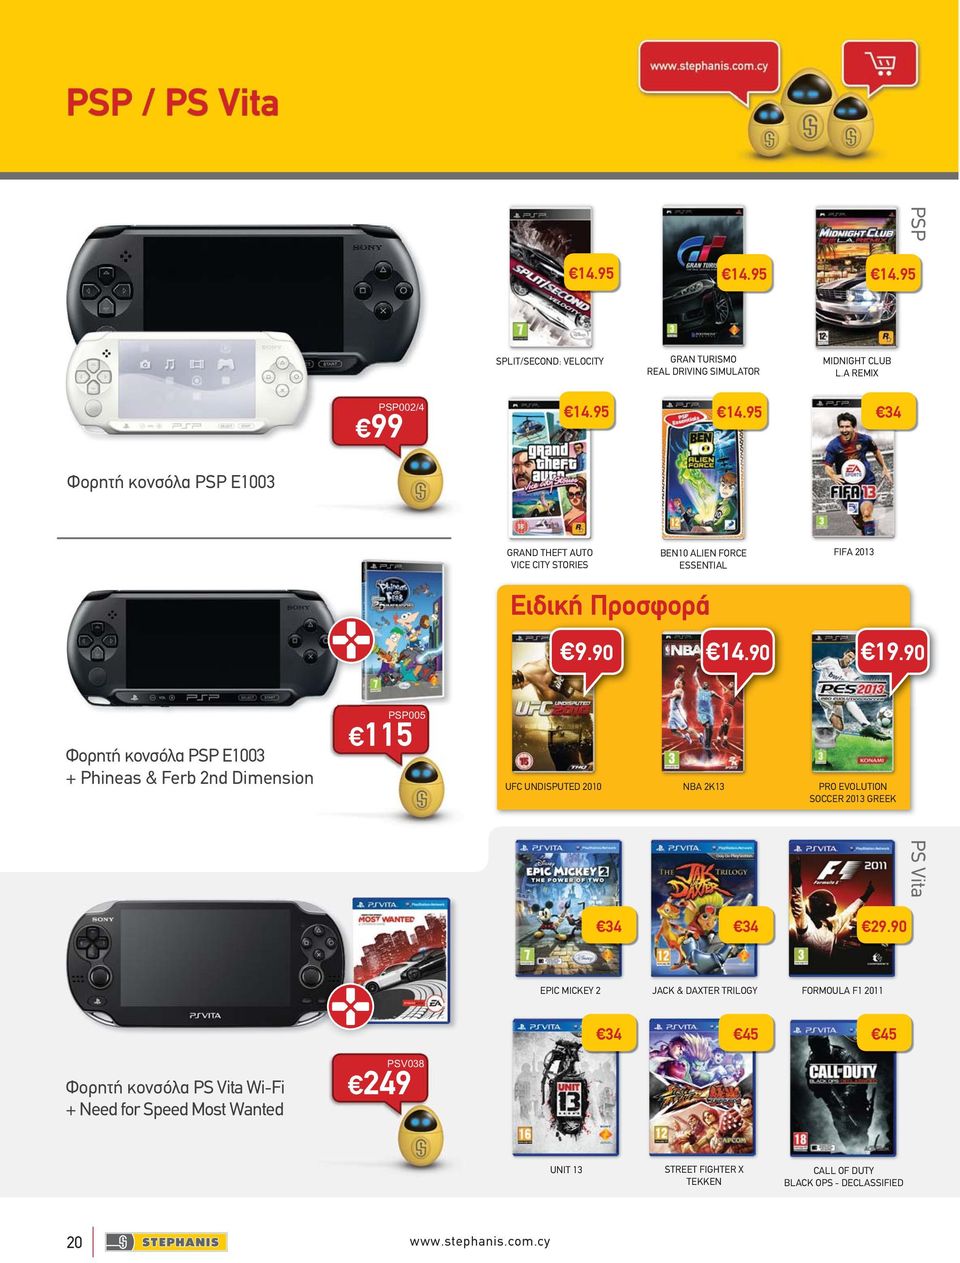 90 EPIC MICKEY 2 JACK & DAXTER TRILOGY FORMOULA F1 2011 34 45 45 Φορητή κονσόλα PS Vita Wi-Fi + Need for Speed Most Wanted PSV038 249 UNIT 13 STREET FIGHTER X